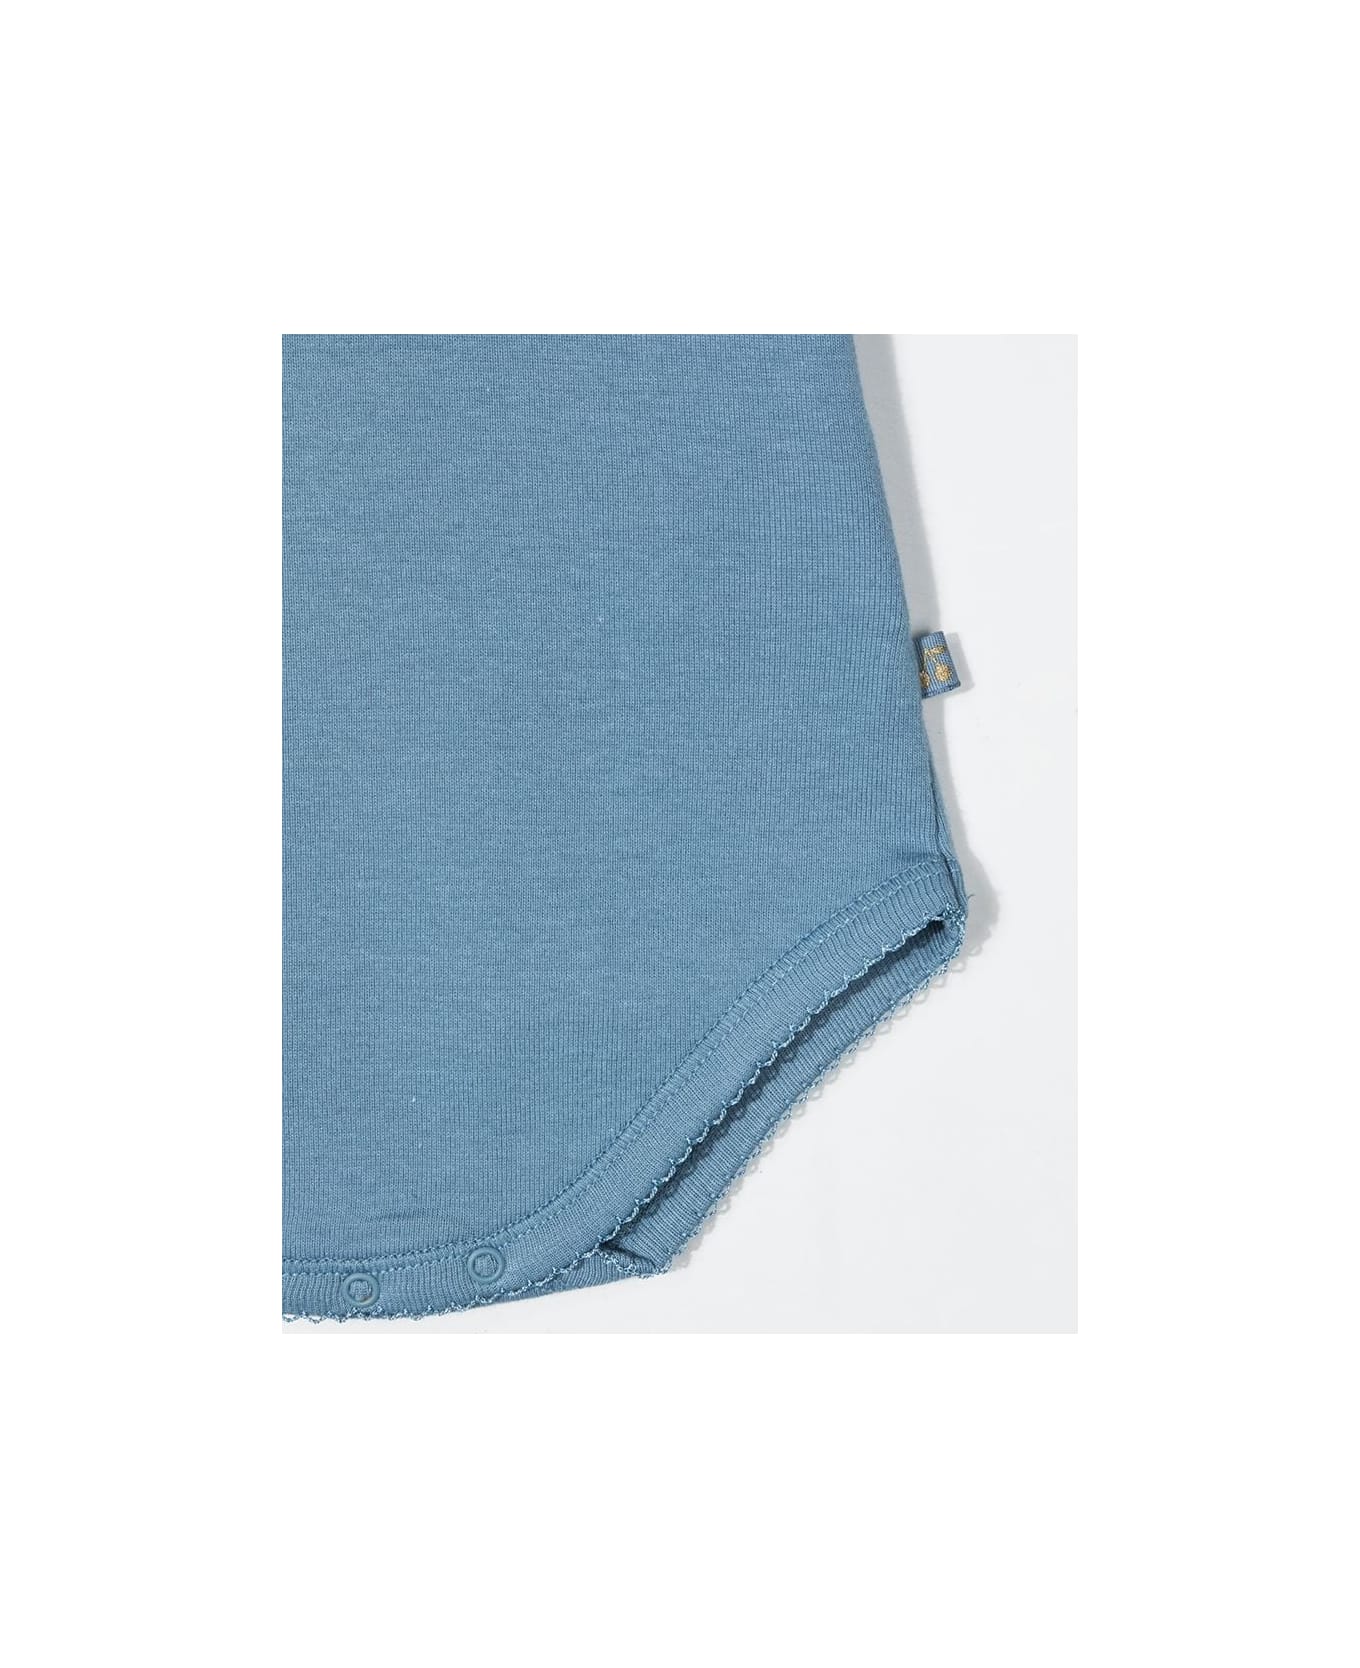 Bonpoint 3 Body Pack In Light Blue And White Cotton - Blue